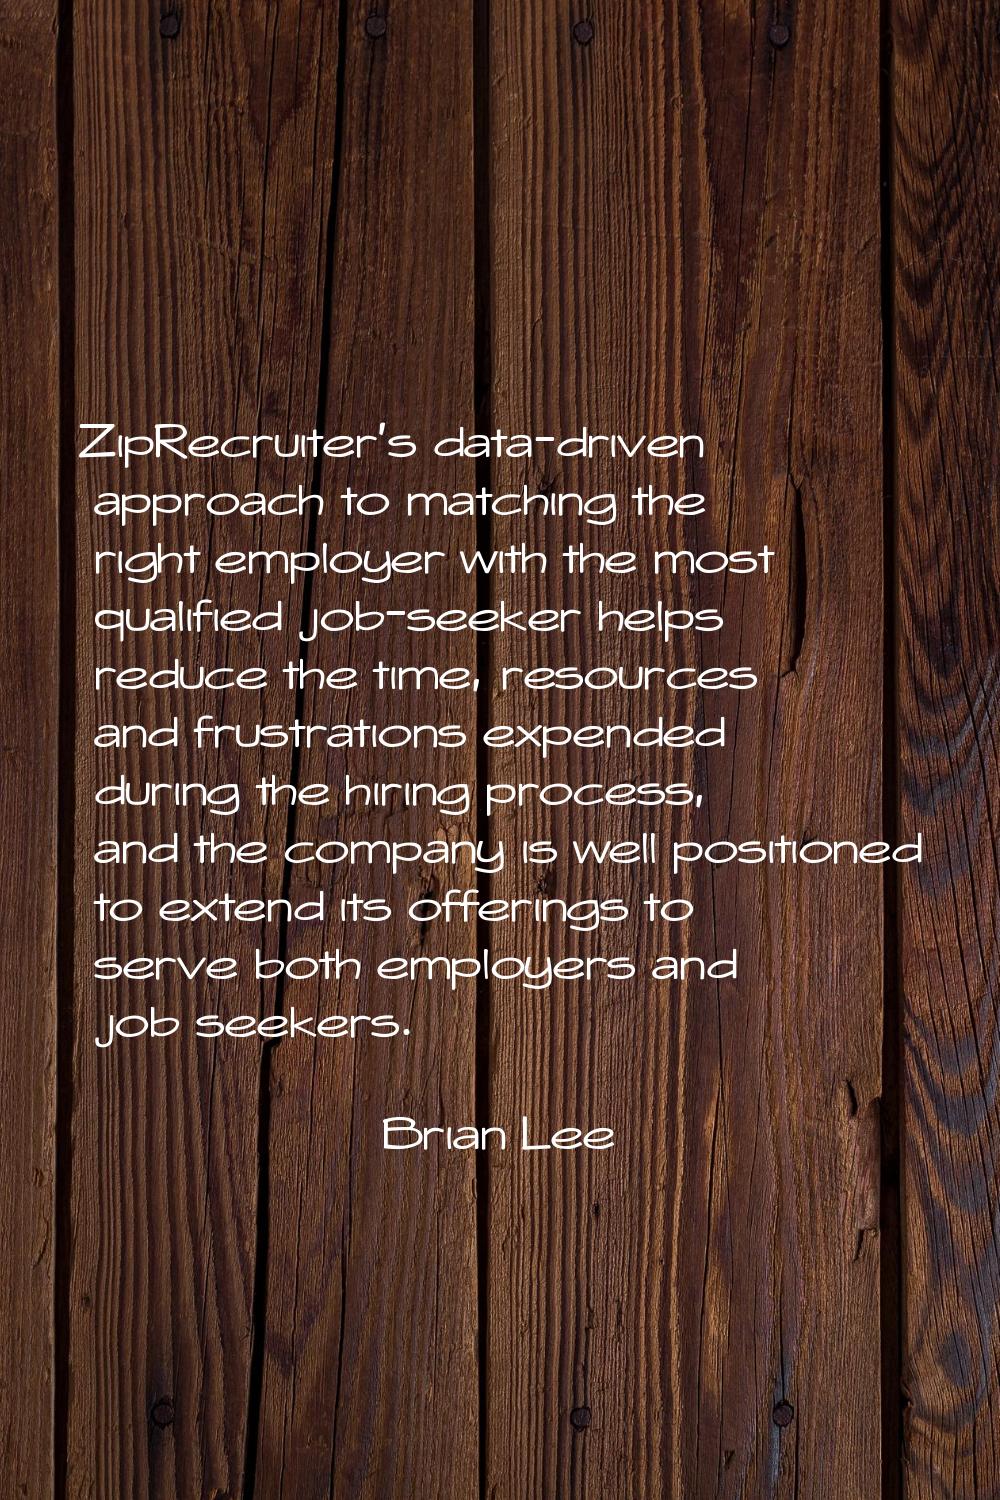 ZipRecruiter's data-driven approach to matching the right employer with the most qualified job-seek